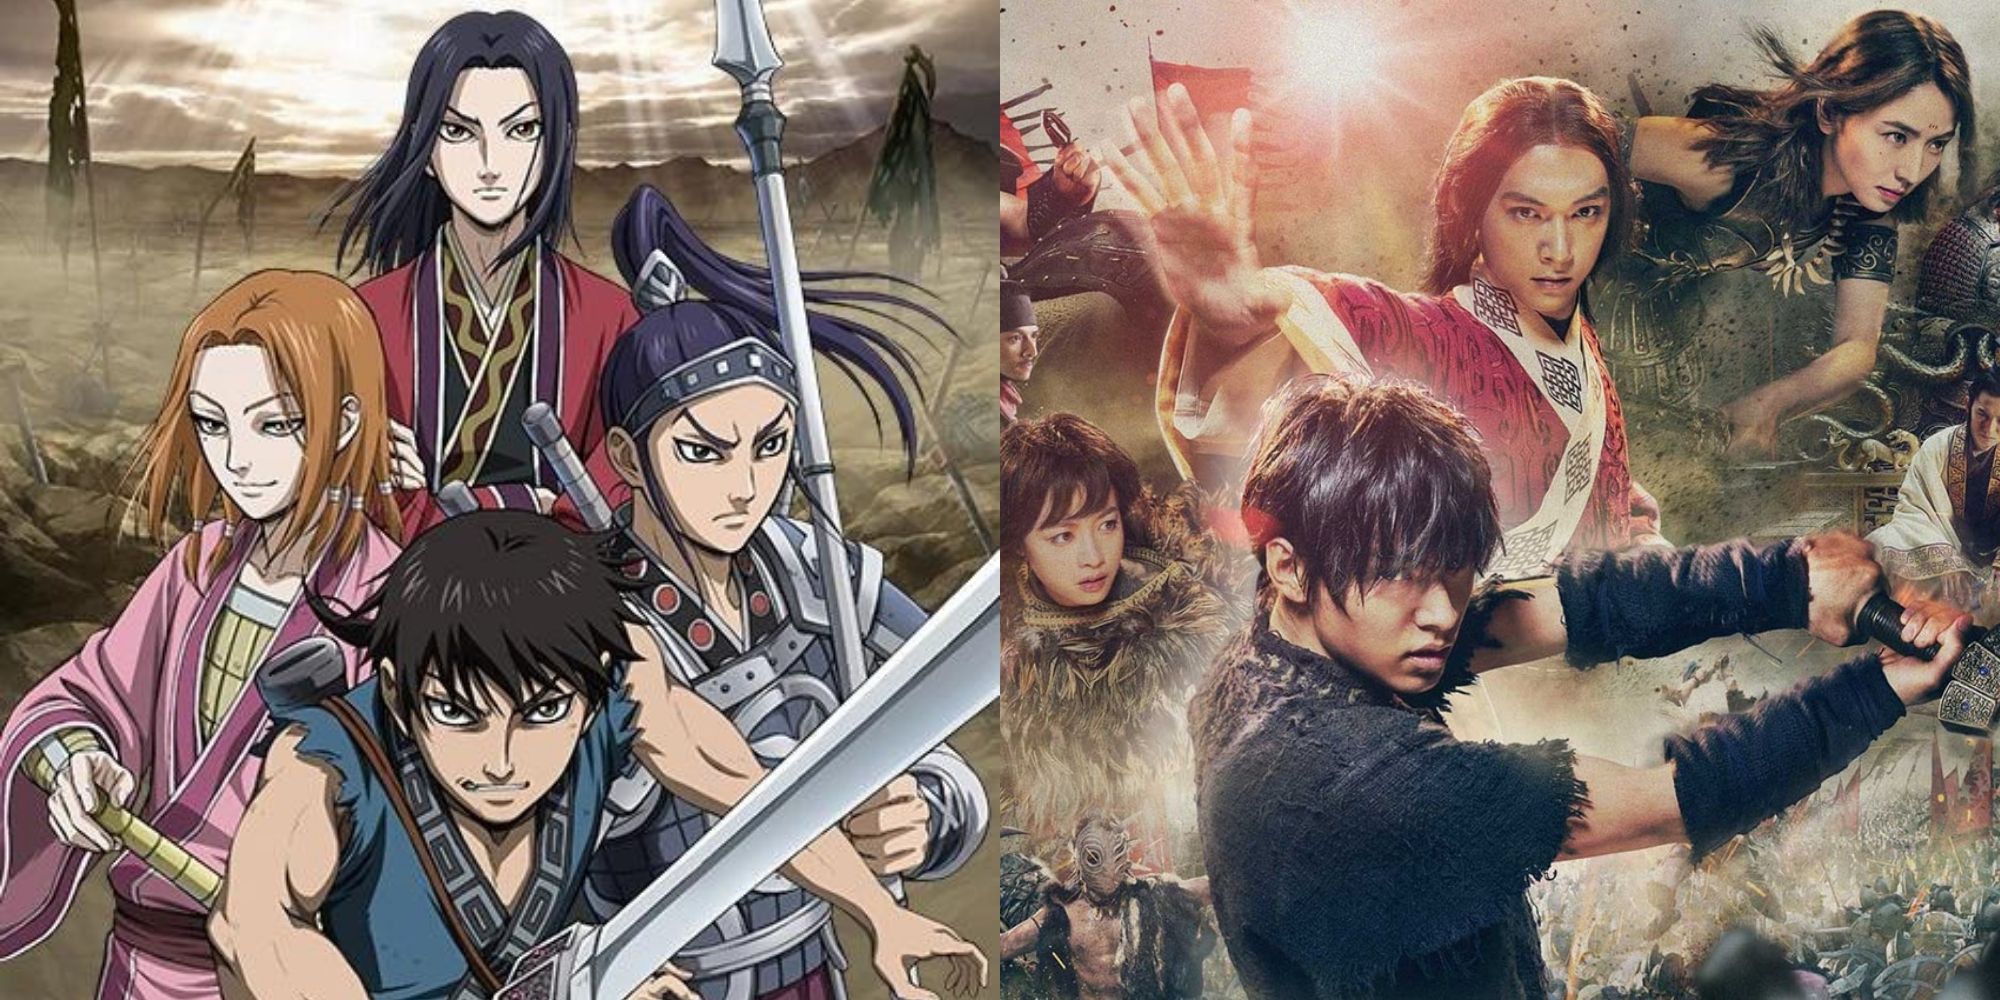 Kingdom anime and live-action poster